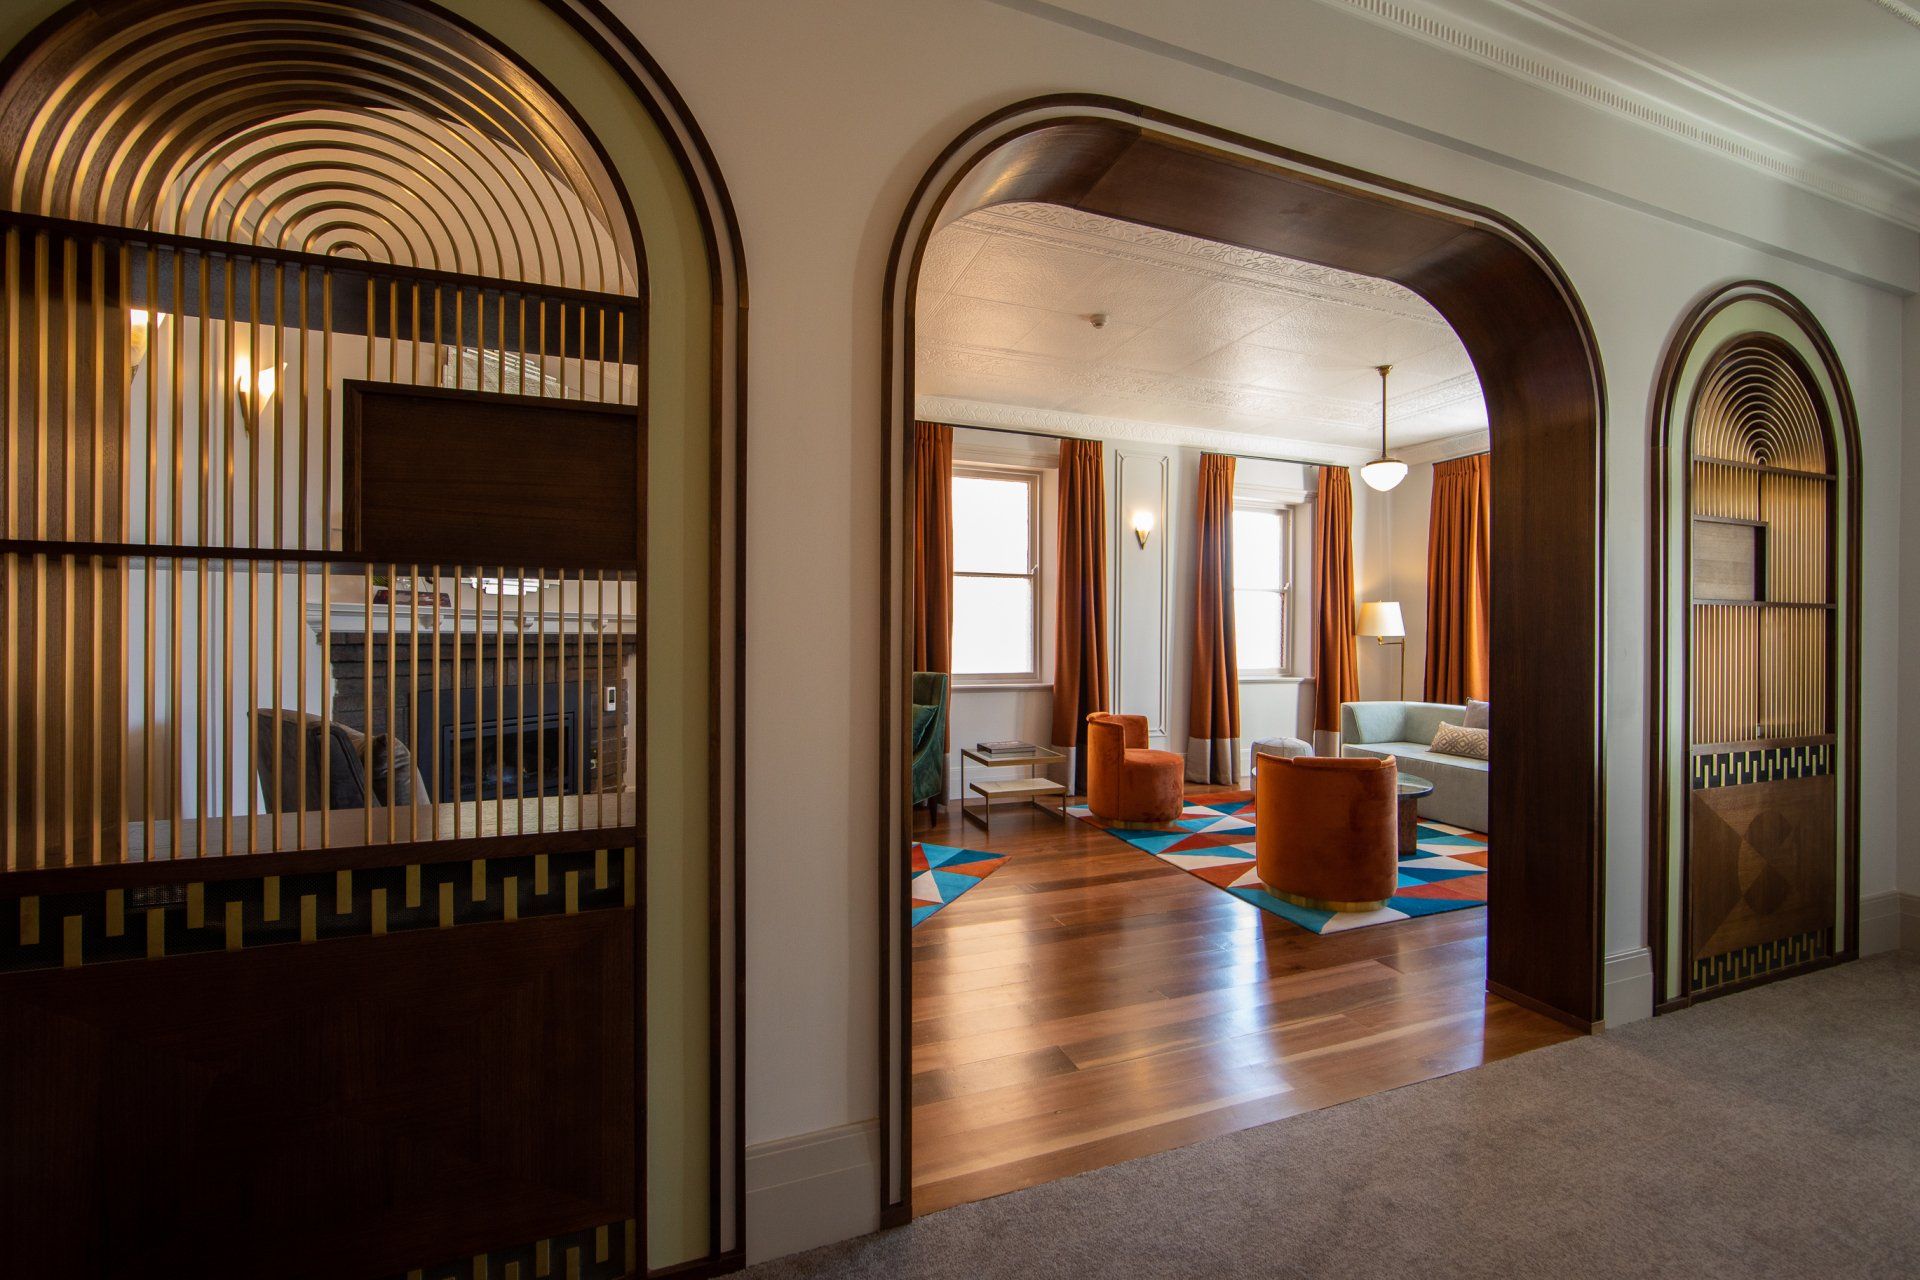 a hallway with arched doors leading to a common area at tattersalls hotel.